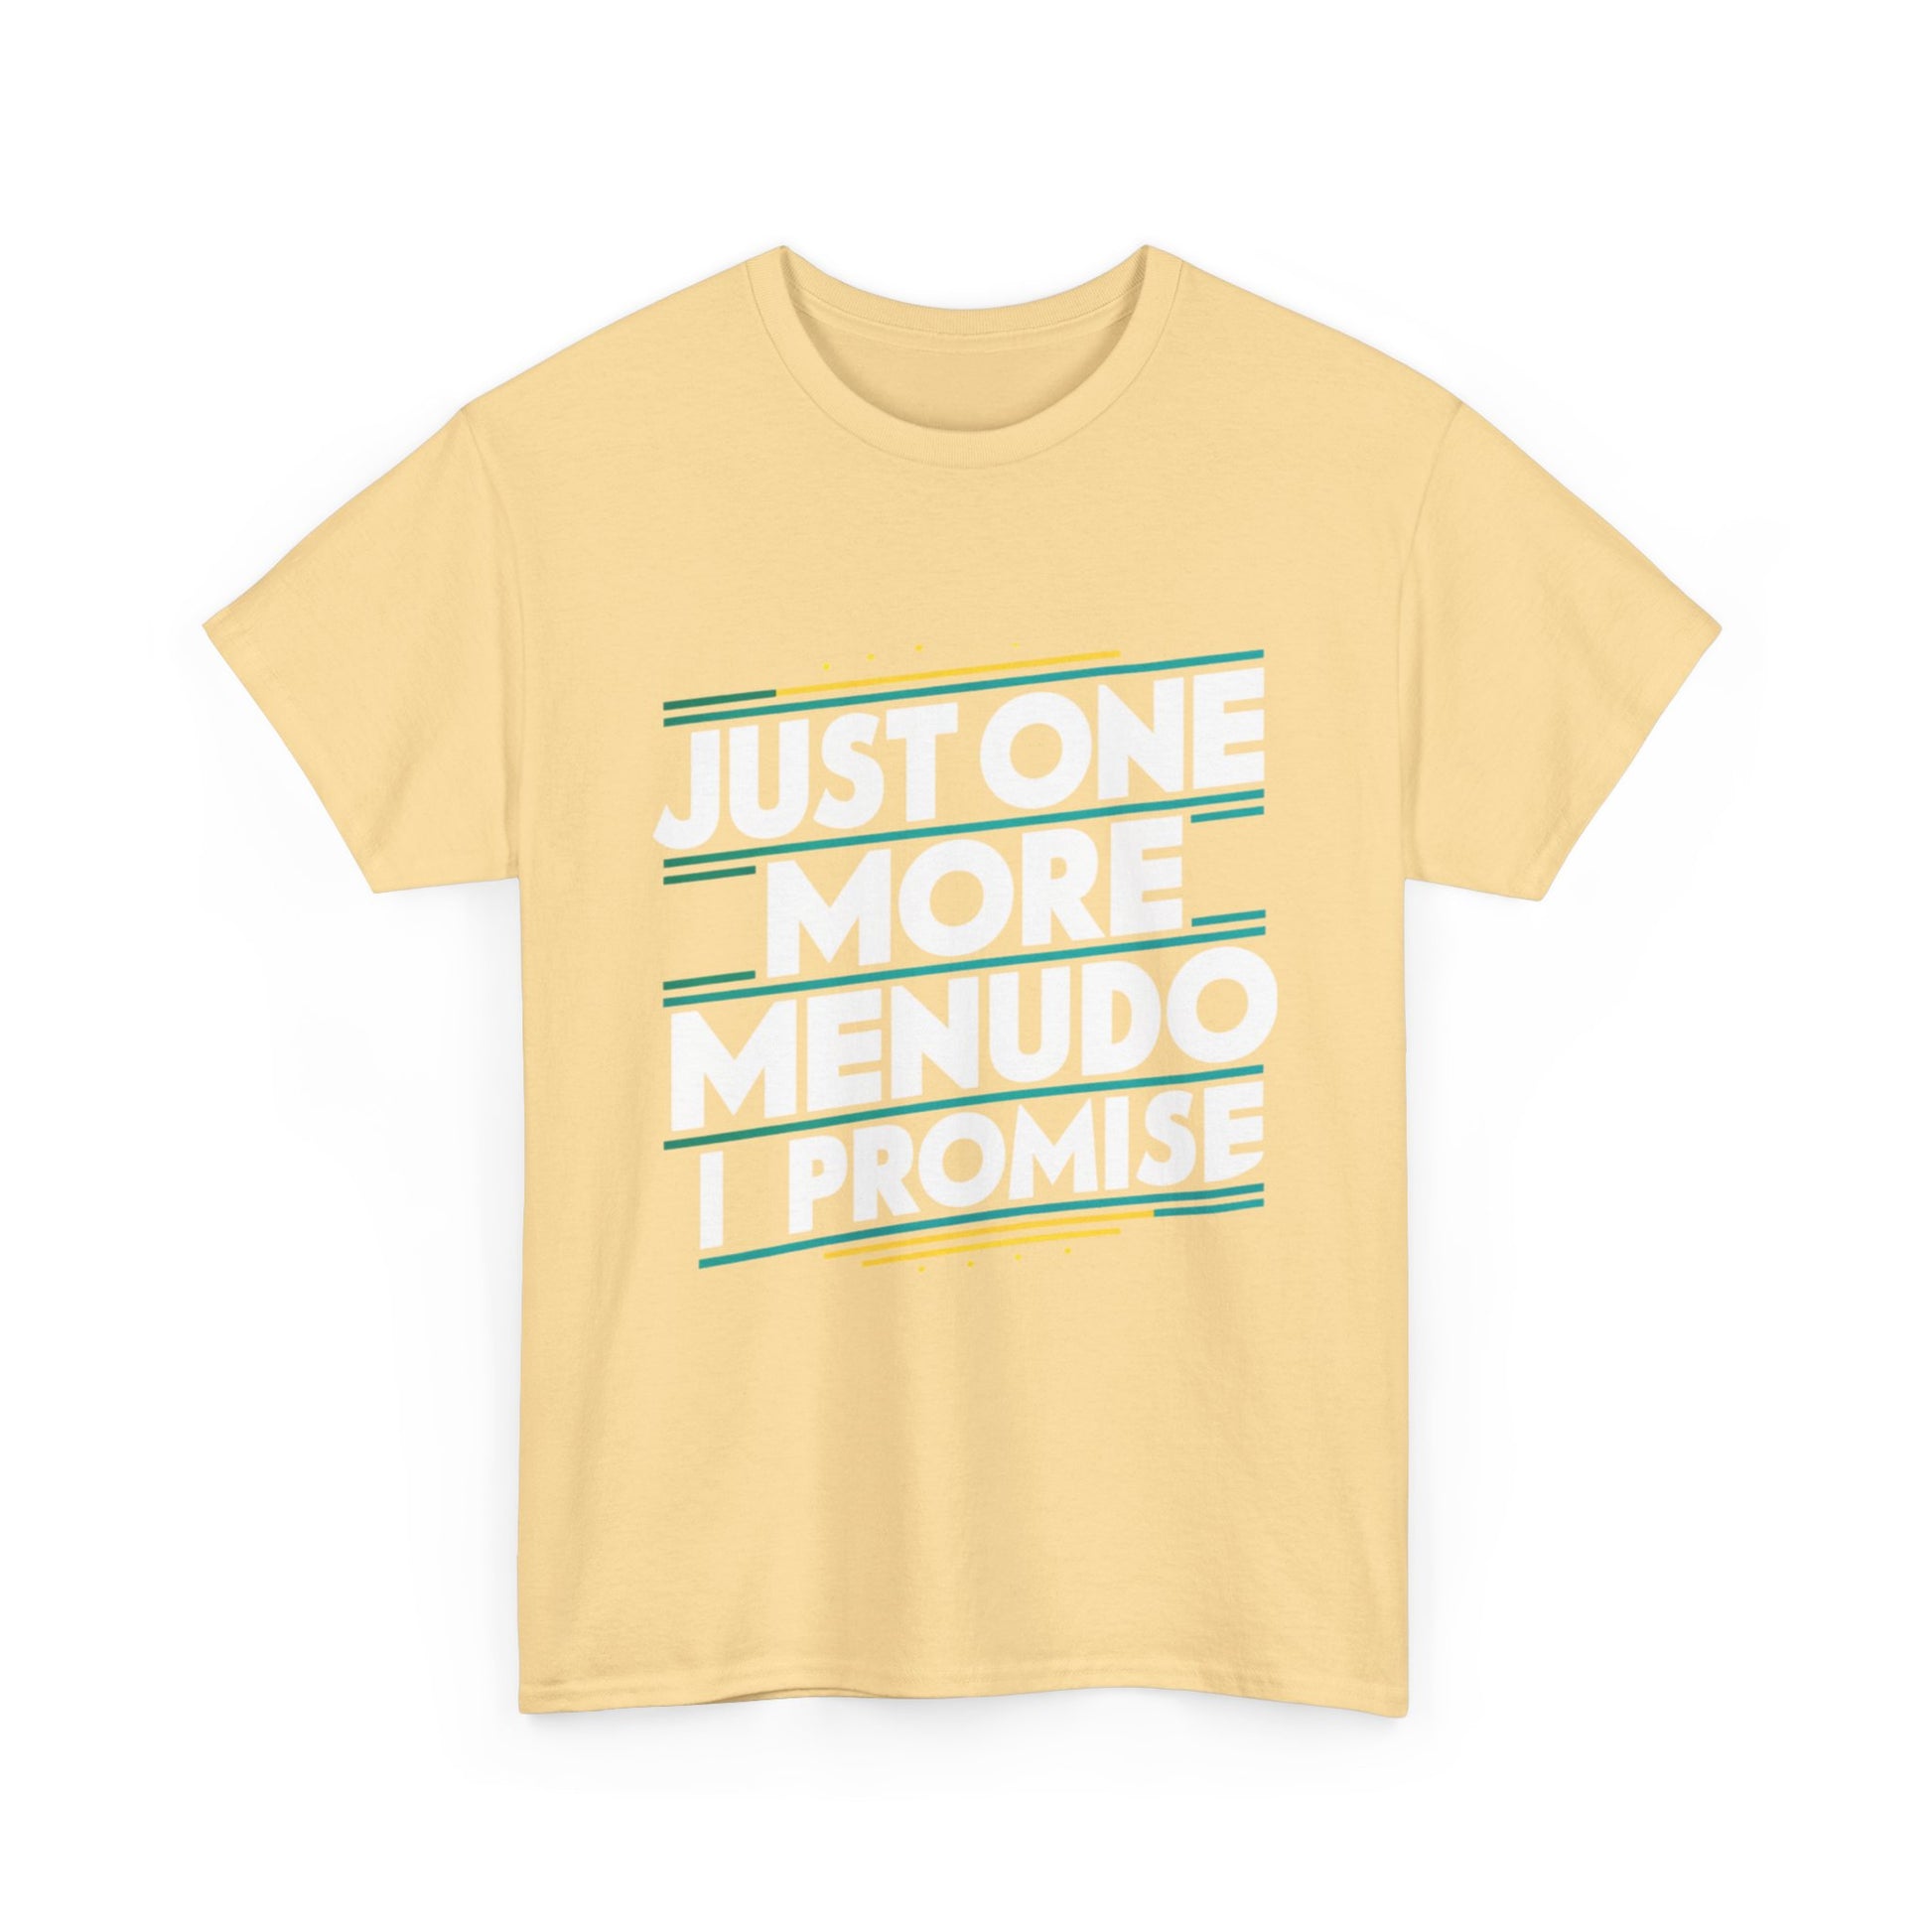 Just One More Menudo I Promise Mexican Food Graphic Unisex Heavy Cotton Tee Cotton Funny Humorous Graphic Soft Premium Unisex Men Women Yellow Haze T-shirt Birthday Gift-45